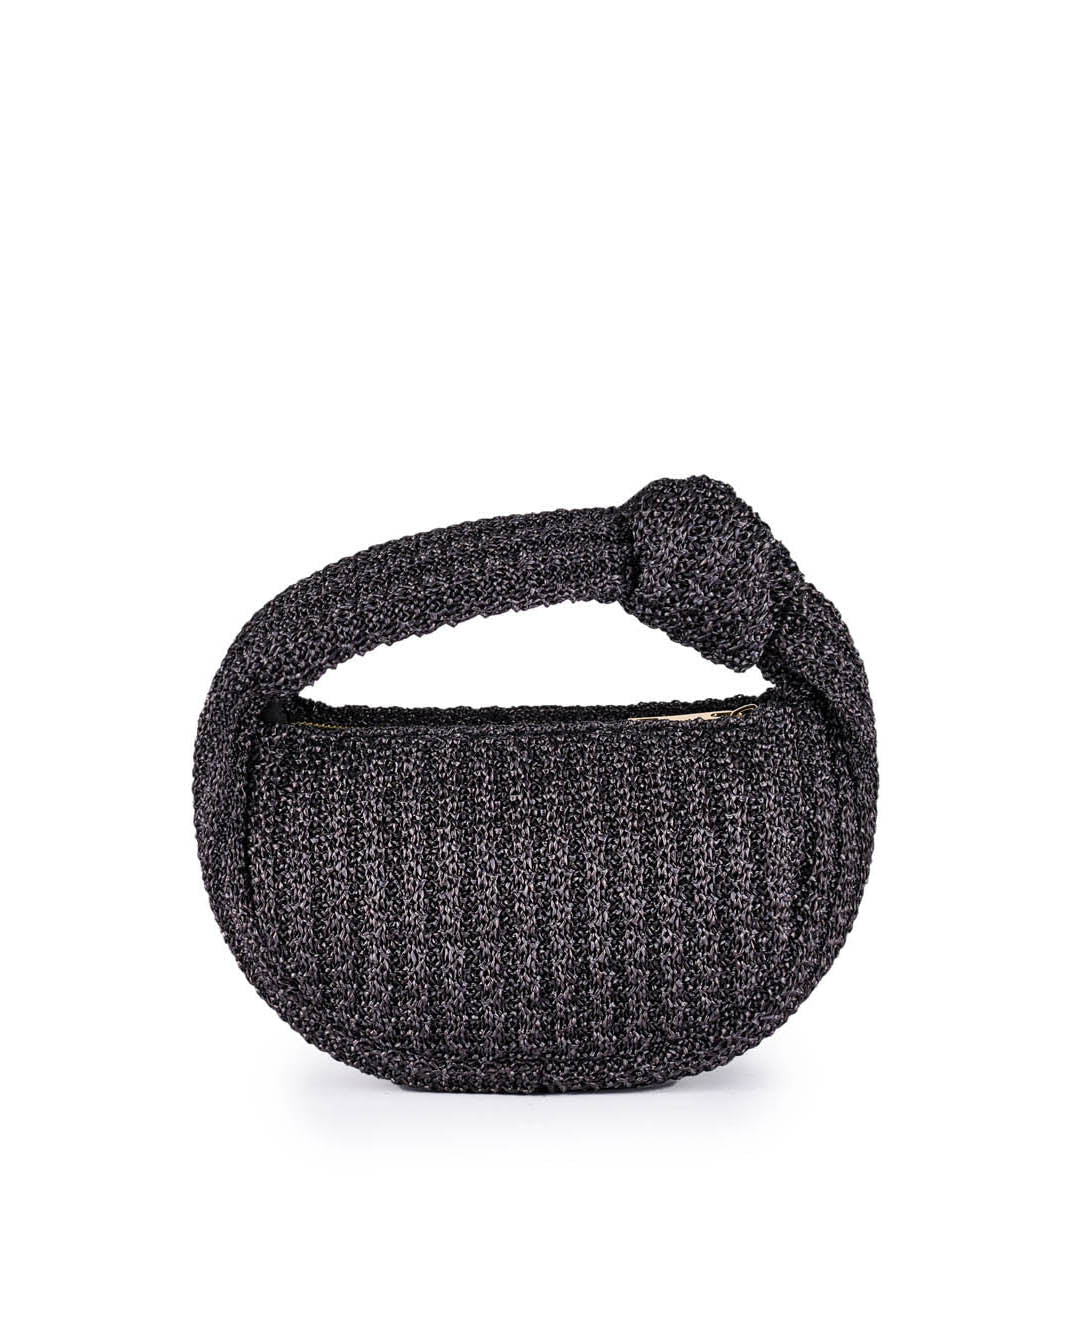 Black woven handbag with knotted handle